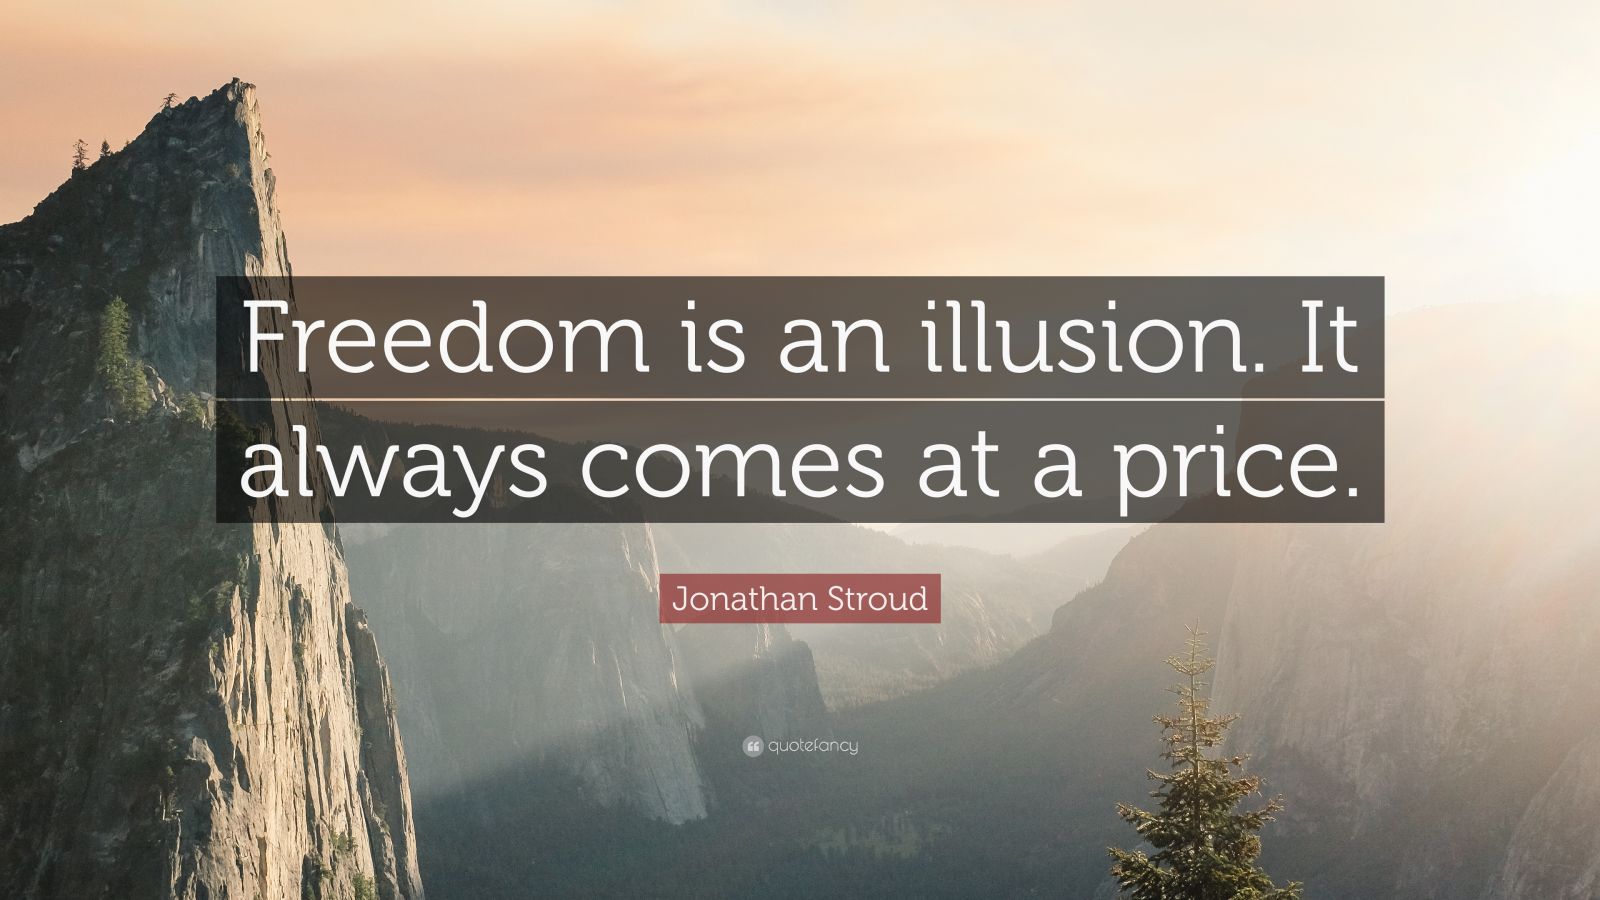 Jonathan Stroud Quote: “Freedom is an illusion. It always comes at a ...